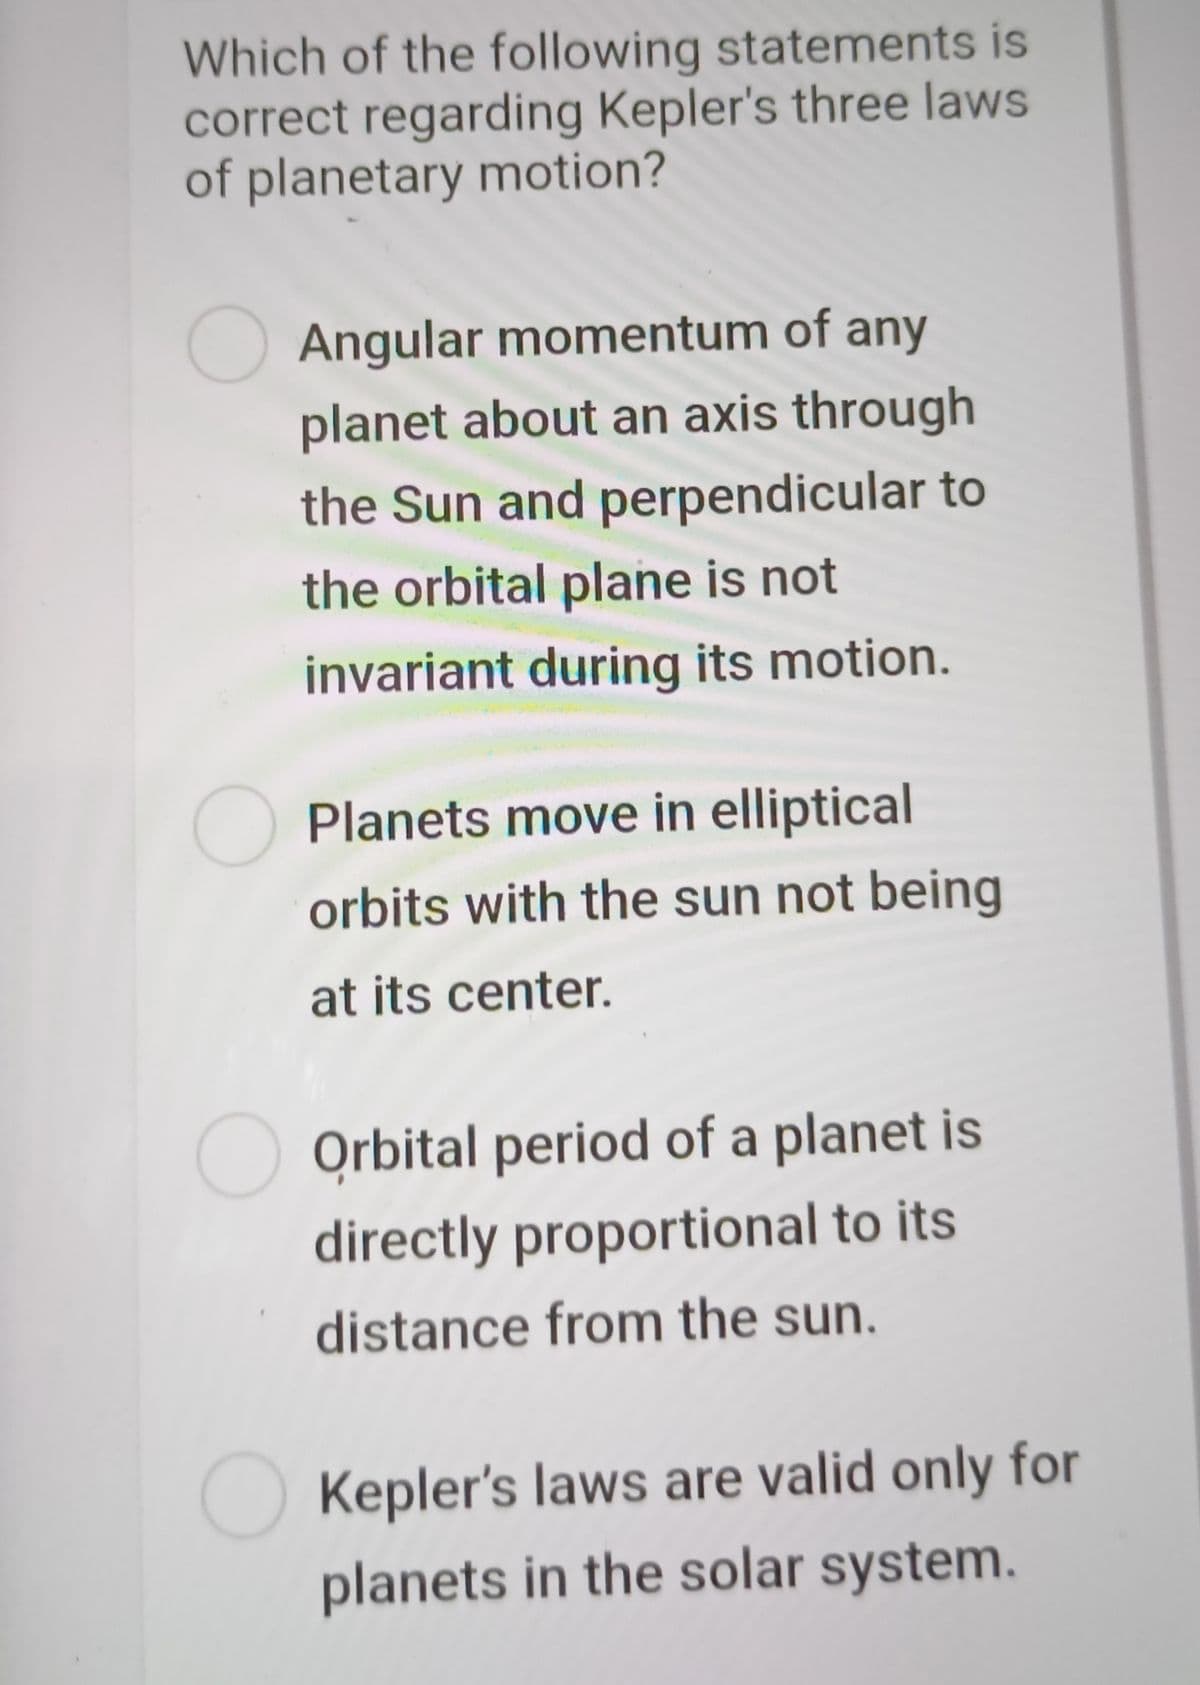 Which of the following statements is
correct regarding Kepler's three laws
of planetary motion?
Angular momentum of any
planet about an axis through
the Sun and perpendicular to
the orbital plane is not
invariant during its motion.
Planets move in elliptical
orbits with the sun not being
at its center.
O Orbital period of a planet is
directly proportional to its
distance from the sun.
O Kepler's laws are valid only for
planets in the solar system.
